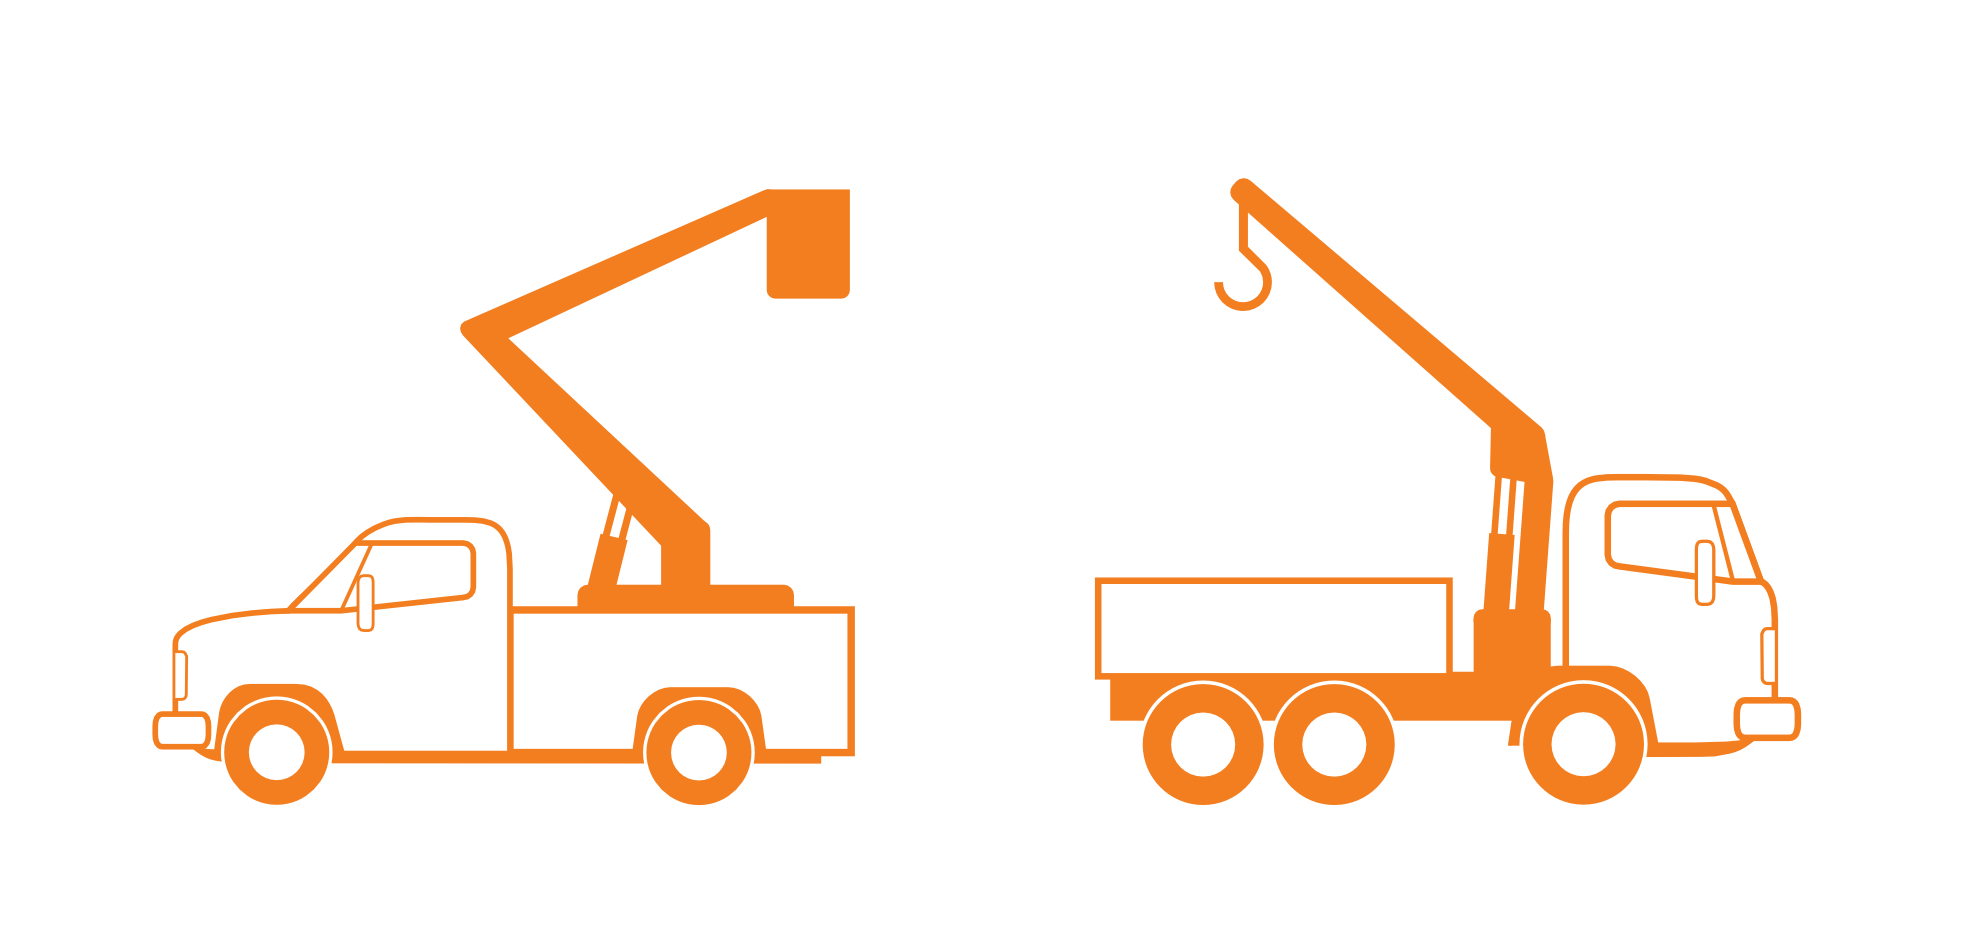 Construction Crane Clipart at GetDrawings Free download.